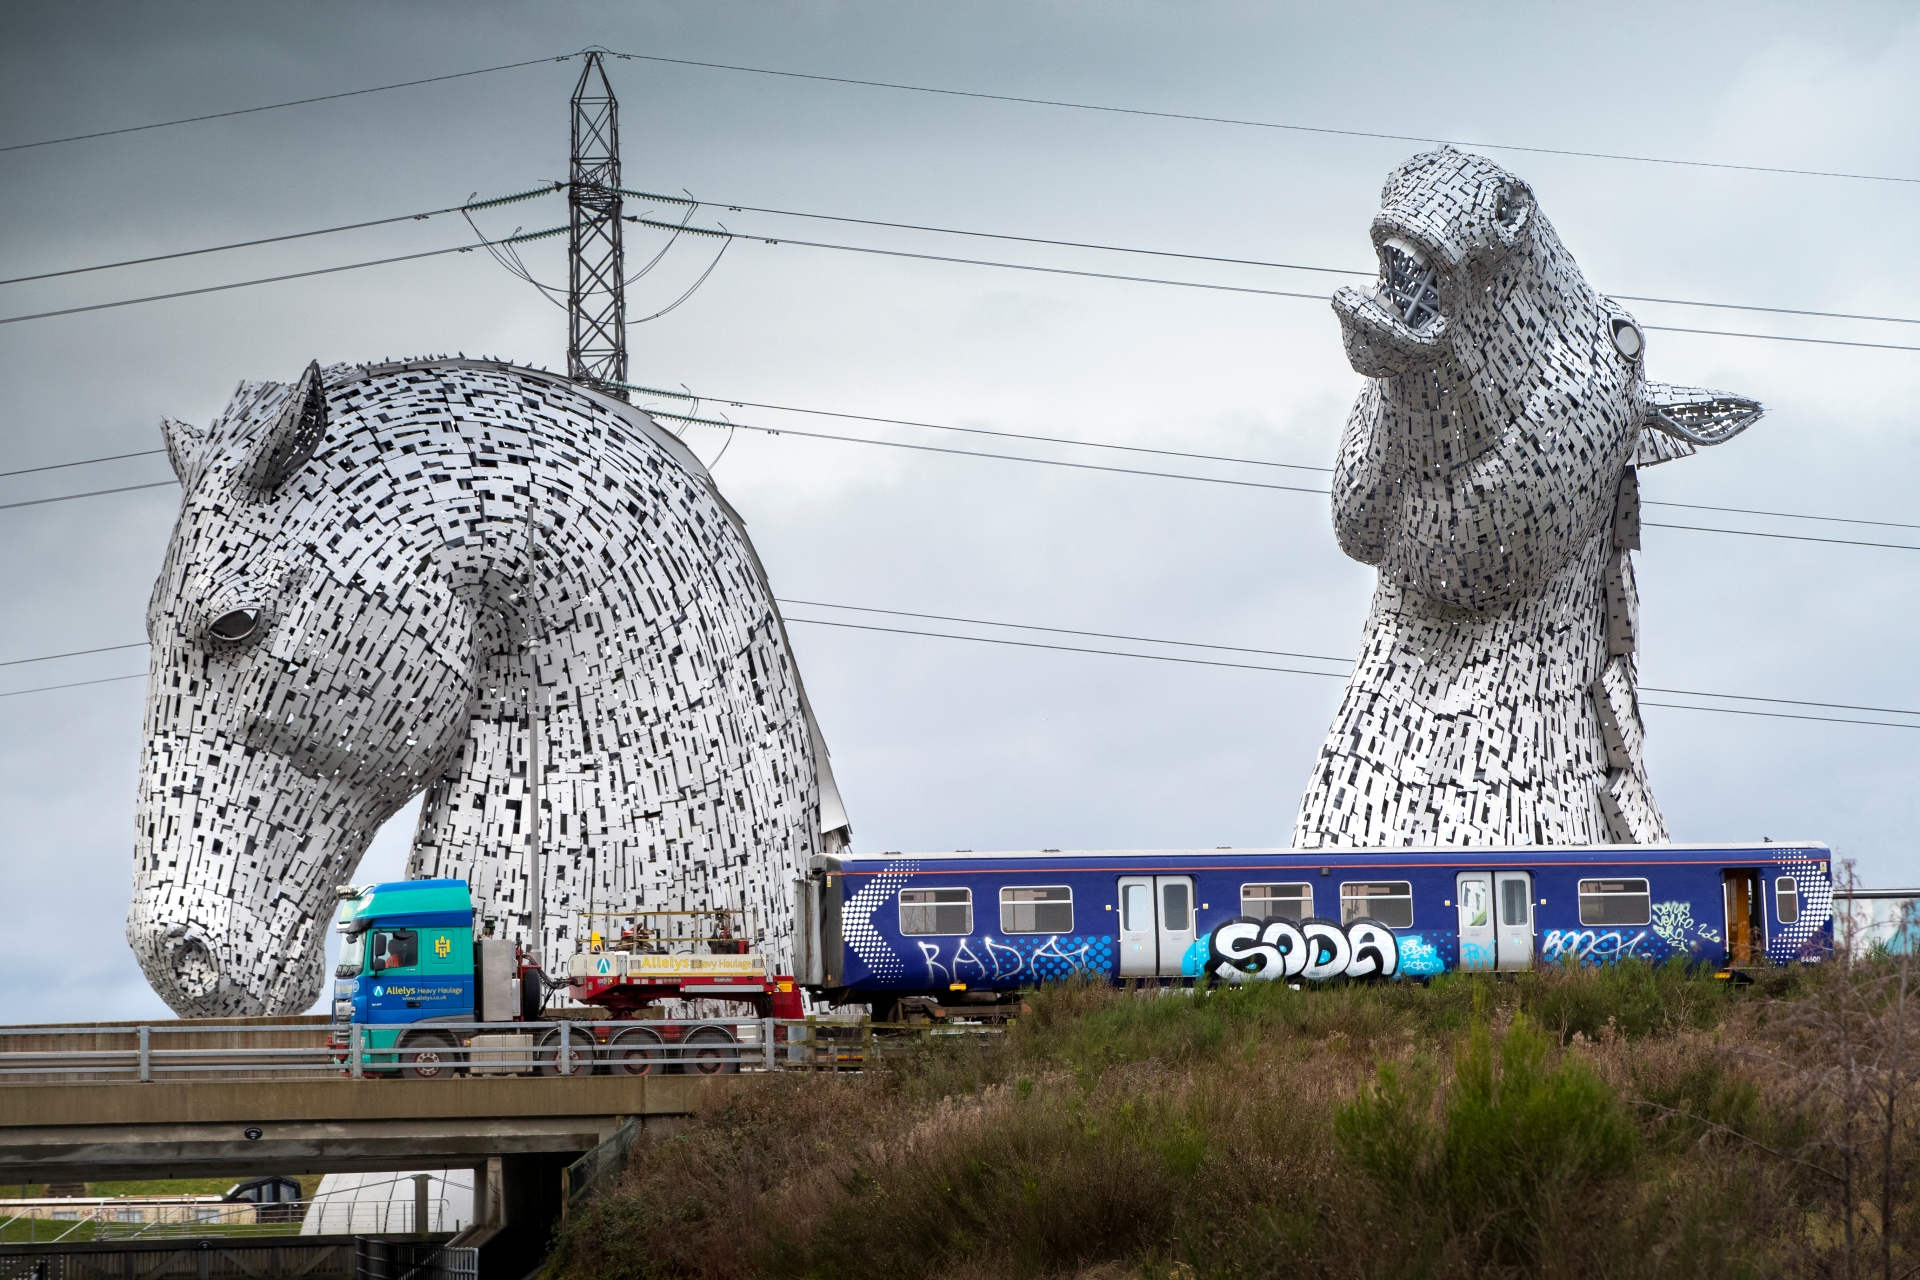 Image of Scotrail carraige loaded onto a truck, on its way to Bo-Ness, travelling past The Kelpies at Grangemouth, Forth & Clyde Canal.